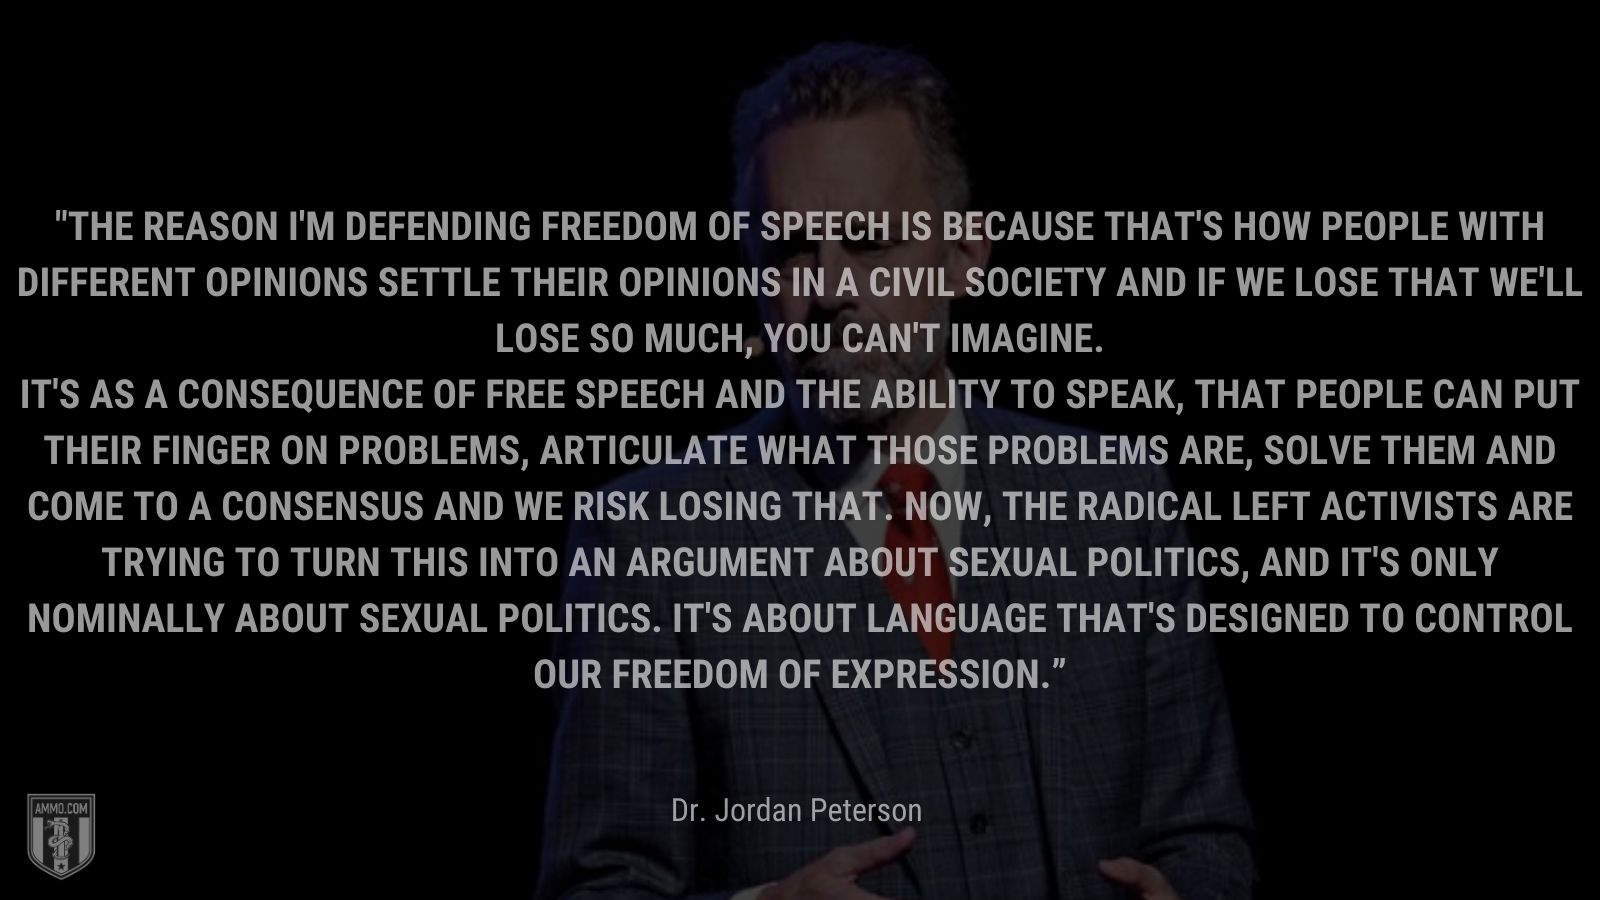 “The reason I'm defending freedom of speech is because that's how people with different opinions settle their opinions in a civil society and if we lose that we'll lose so much, you can't imagine.” - Dr. Jordan Peterson